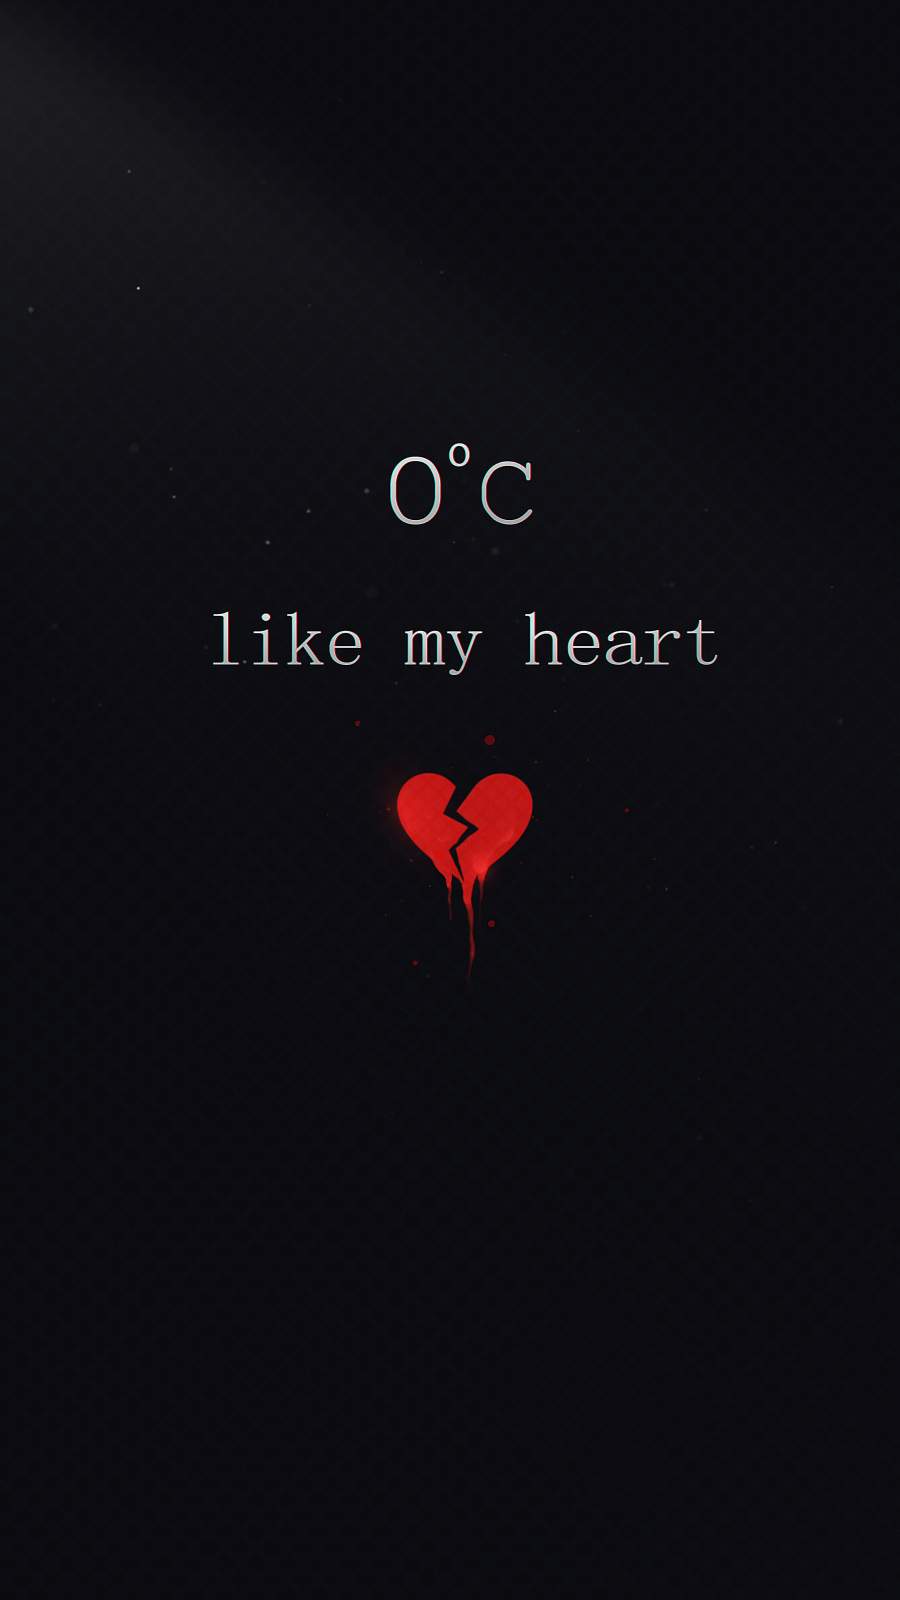 Cold Hearted IPhone Wallpaper Wallpaper, iPhone Wallpaper